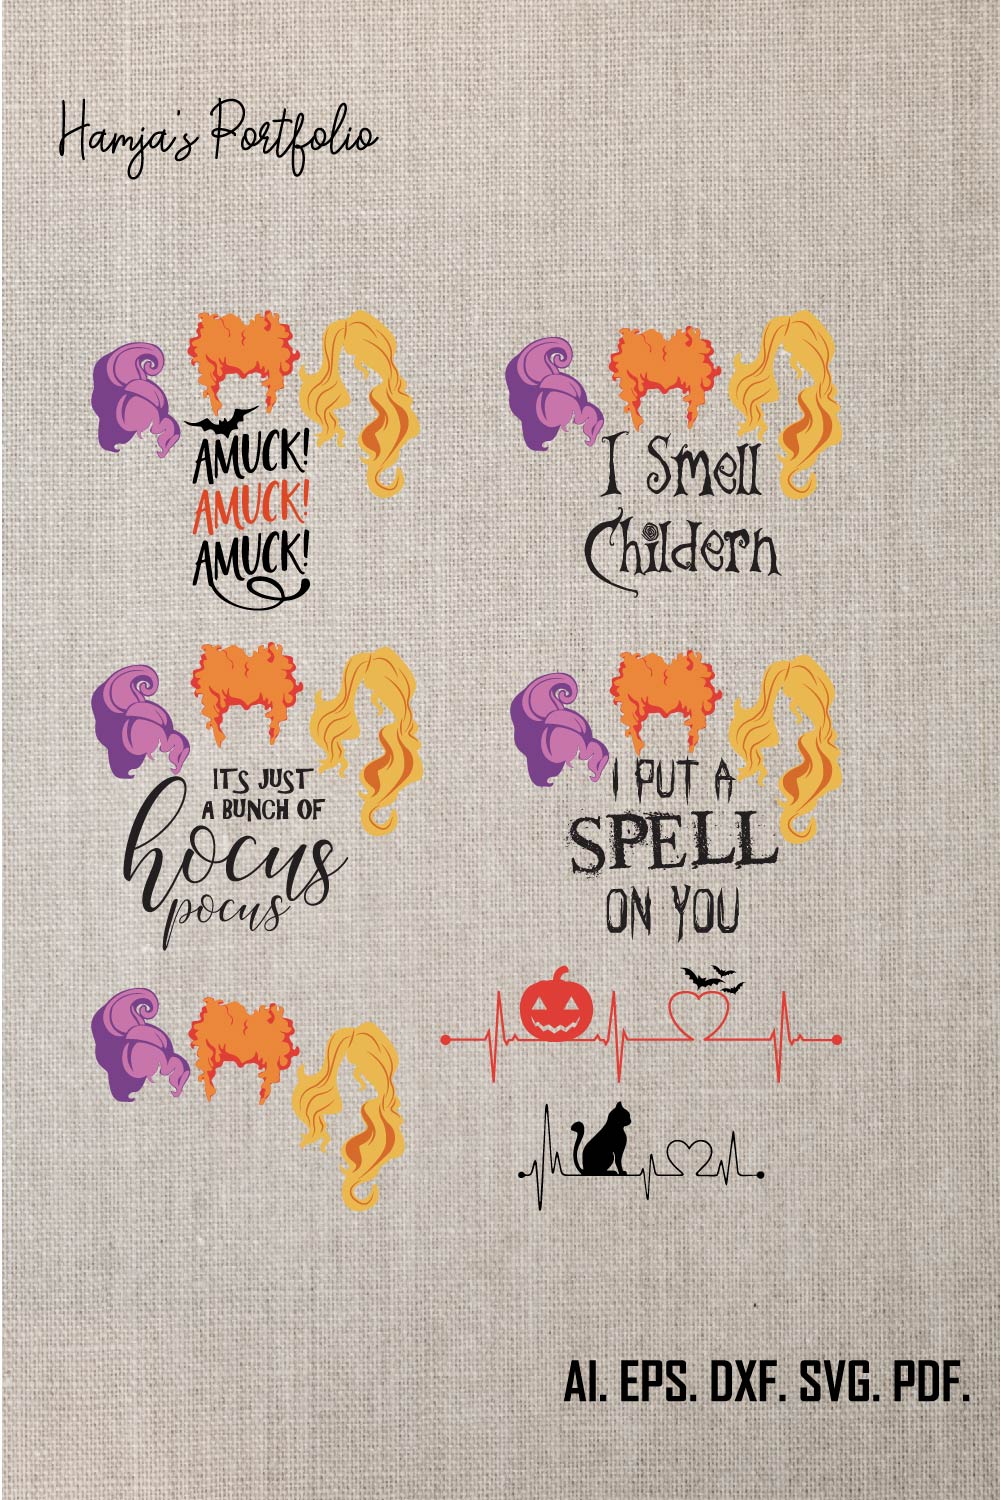 Sistaaas SVG, Hocus Pocus SVG, Halloween Witches Shirt Design, Sanderson Sisters Cut Files, Witch Hair, Digital Cut Files svg dxf png jpg pinterest preview image.